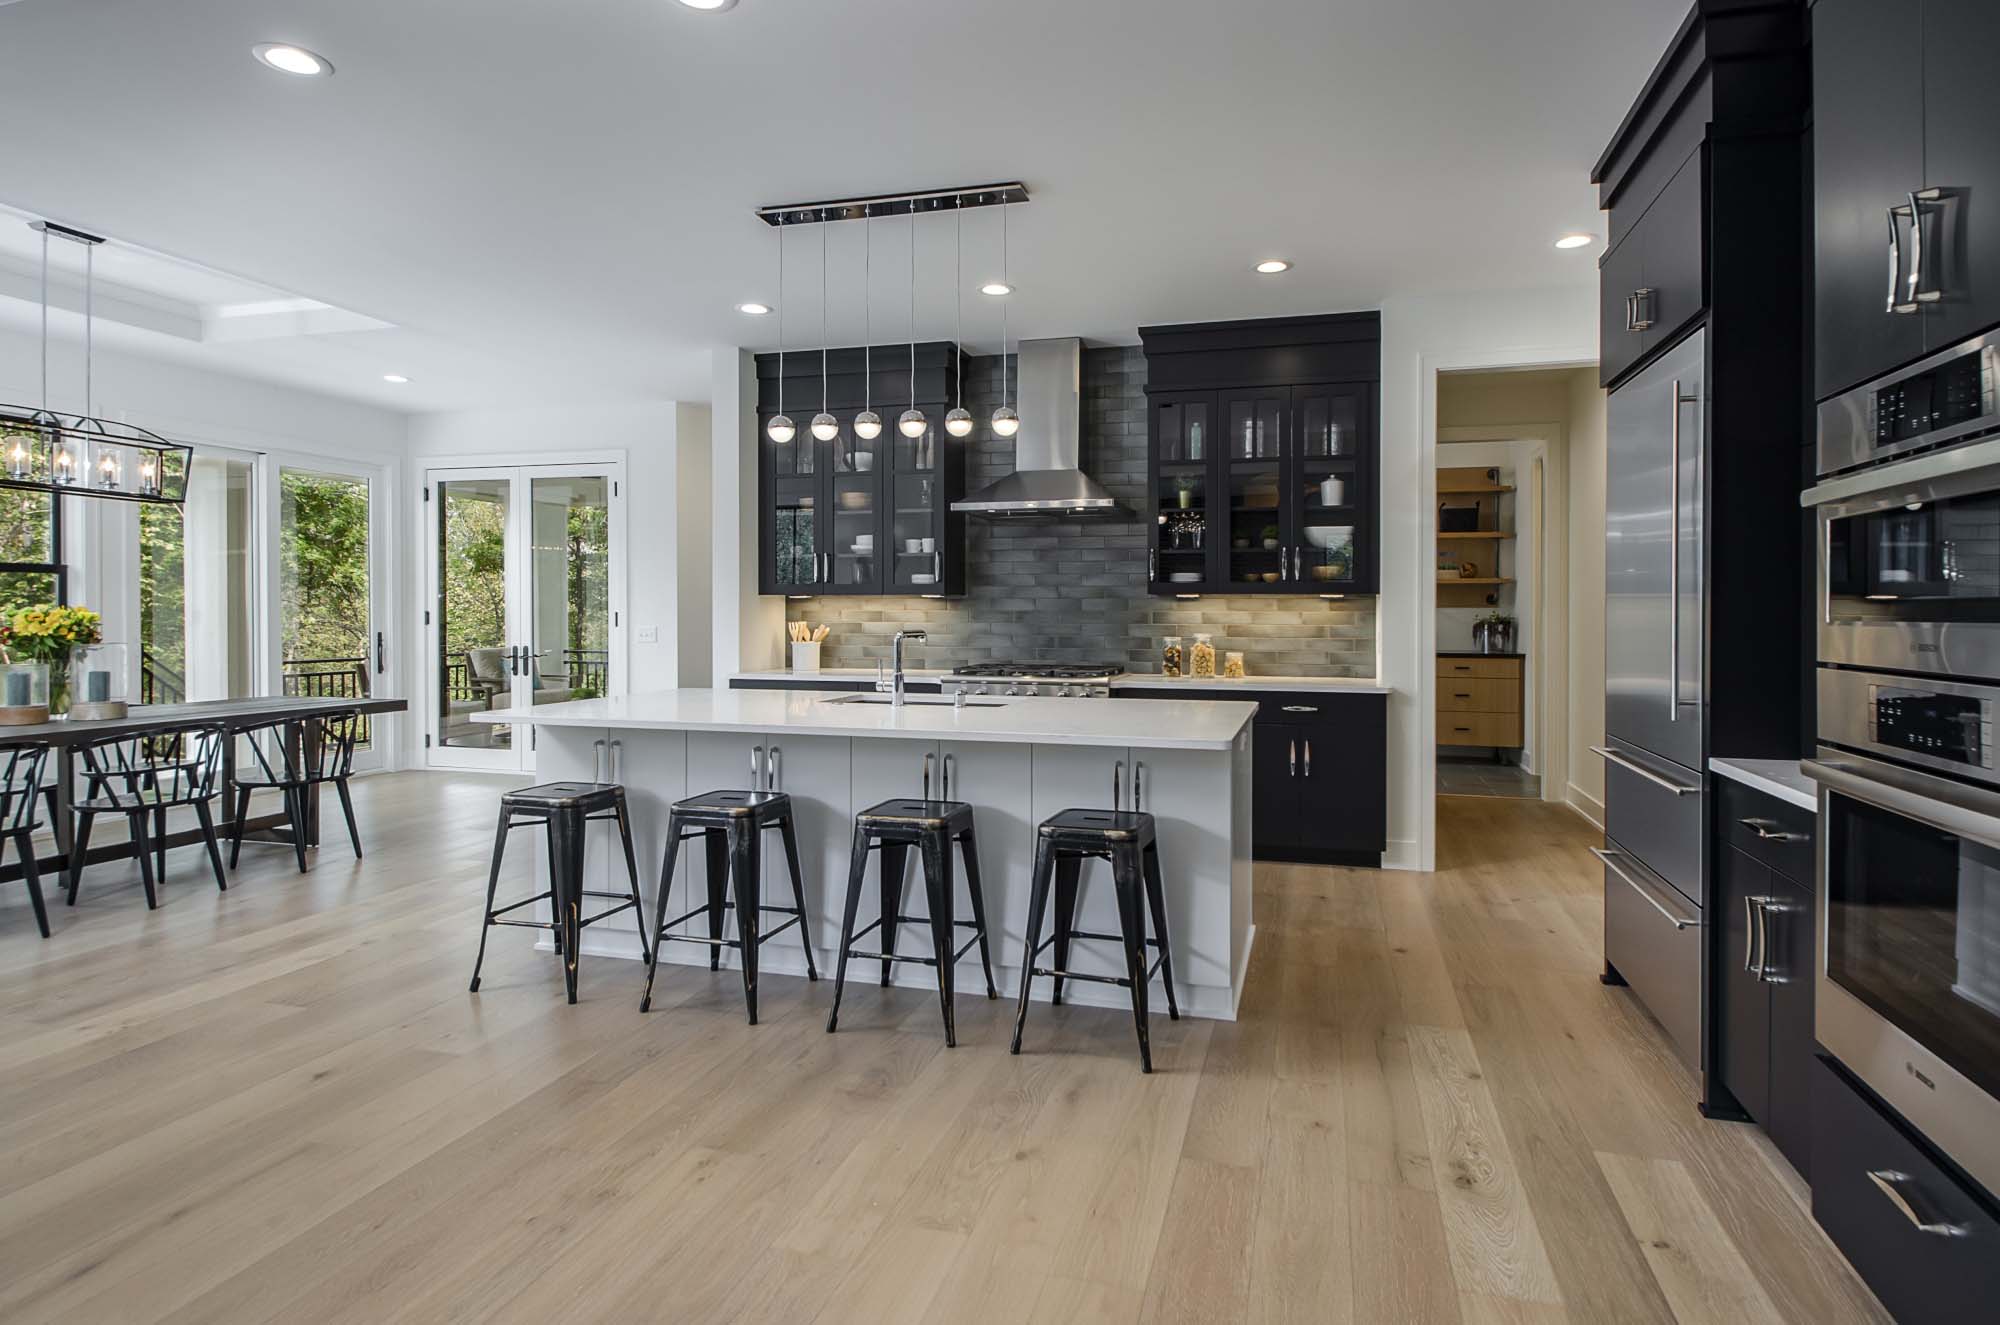 A contemporary kitchen with sleek black cabinets and beautiful hardwood floors.